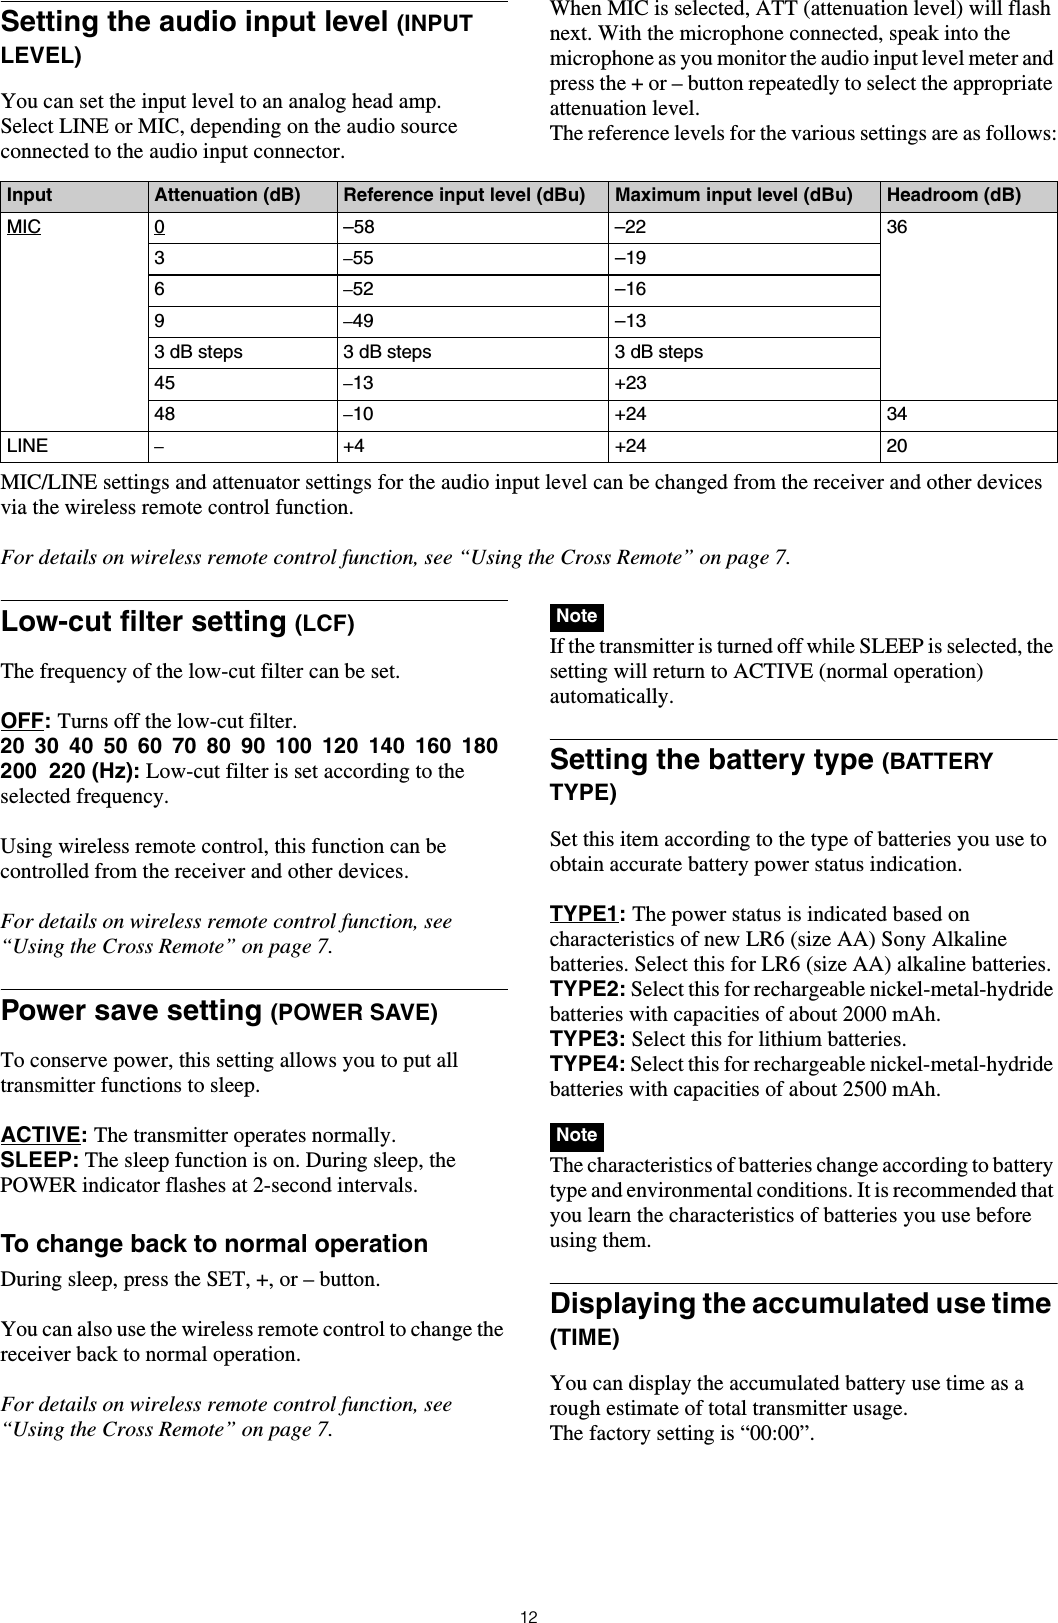 12Setting the audio input level (INPUT LEVEL) You can set the input level to an analog head amp.Select LINE or MIC, depending on the audio source connected to the audio input connector.When MIC is selected, ATT (attenuation level) will flash next. With the microphone connected, speak into the microphone as you monitor the audio input level meter and press the + or – button repeatedly to select the appropriate attenuation level.The reference levels for the various settings are as follows:MIC/LINE settings and attenuator settings for the audio input level can be changed from the receiver and other devices via the wireless remote control function.For details on wireless remote control function, see “Using the Cross Remote” on page 7.Low-cut filter setting (LCF)The frequency of the low-cut filter can be set.OFF: Turns off the low-cut filter.20  30  40  50  60  70  80  90  100  120  140  160  180  200  220 (Hz): Low-cut filter is set according to the selected frequency.Using wireless remote control, this function can be controlled from the receiver and other devices.For details on wireless remote control function, see “Using the Cross Remote” on page 7.Power save setting (POWER SAVE)To conserve power, this setting allows you to put all transmitter functions to sleep.ACTIVE: The transmitter operates normally.SLEEP: The sleep function is on. During sleep, the POWER indicator flashes at 2-second intervals.To change back to normal operationDuring sleep, press the SET, +, or – button.You can also use the wireless remote control to change the receiver back to normal operation.For details on wireless remote control function, see “Using the Cross Remote” on page 7. If the transmitter is turned off while SLEEP is selected, the setting will return to ACTIVE (normal operation) automatically.Setting the battery type (BATTERY TYPE)Set this item according to the type of batteries you use to obtain accurate battery power status indication.TYPE1: The power status is indicated based on characteristics of new LR6 (size AA) Sony Alkaline batteries. Select this for LR6 (size AA) alkaline batteries.TYPE2: Select this for rechargeable nickel-metal-hydride batteries with capacities of about 2000 mAh.TYPE3: Select this for lithium batteries.TYPE4: Select this for rechargeable nickel-metal-hydride batteries with capacities of about 2500 mAh. The characteristics of batteries change according to battery type and environmental conditions. It is recommended that you learn the characteristics of batteries you use before using them.Displaying the accumulated use time (TIME)You can display the accumulated battery use time as a rough estimate of total transmitter usage.The factory setting is “00:00”.Input Attenuation (dB) Reference input level (dBu) Maximum input level (dBu) Headroom (dB)MIC 0–58 –22 363–55 –196–52 –169–49 –133 dB steps  3 dB steps 3 dB steps45 –13 +2348 –10 +24 34LINE –+4 +24 20NoteNote